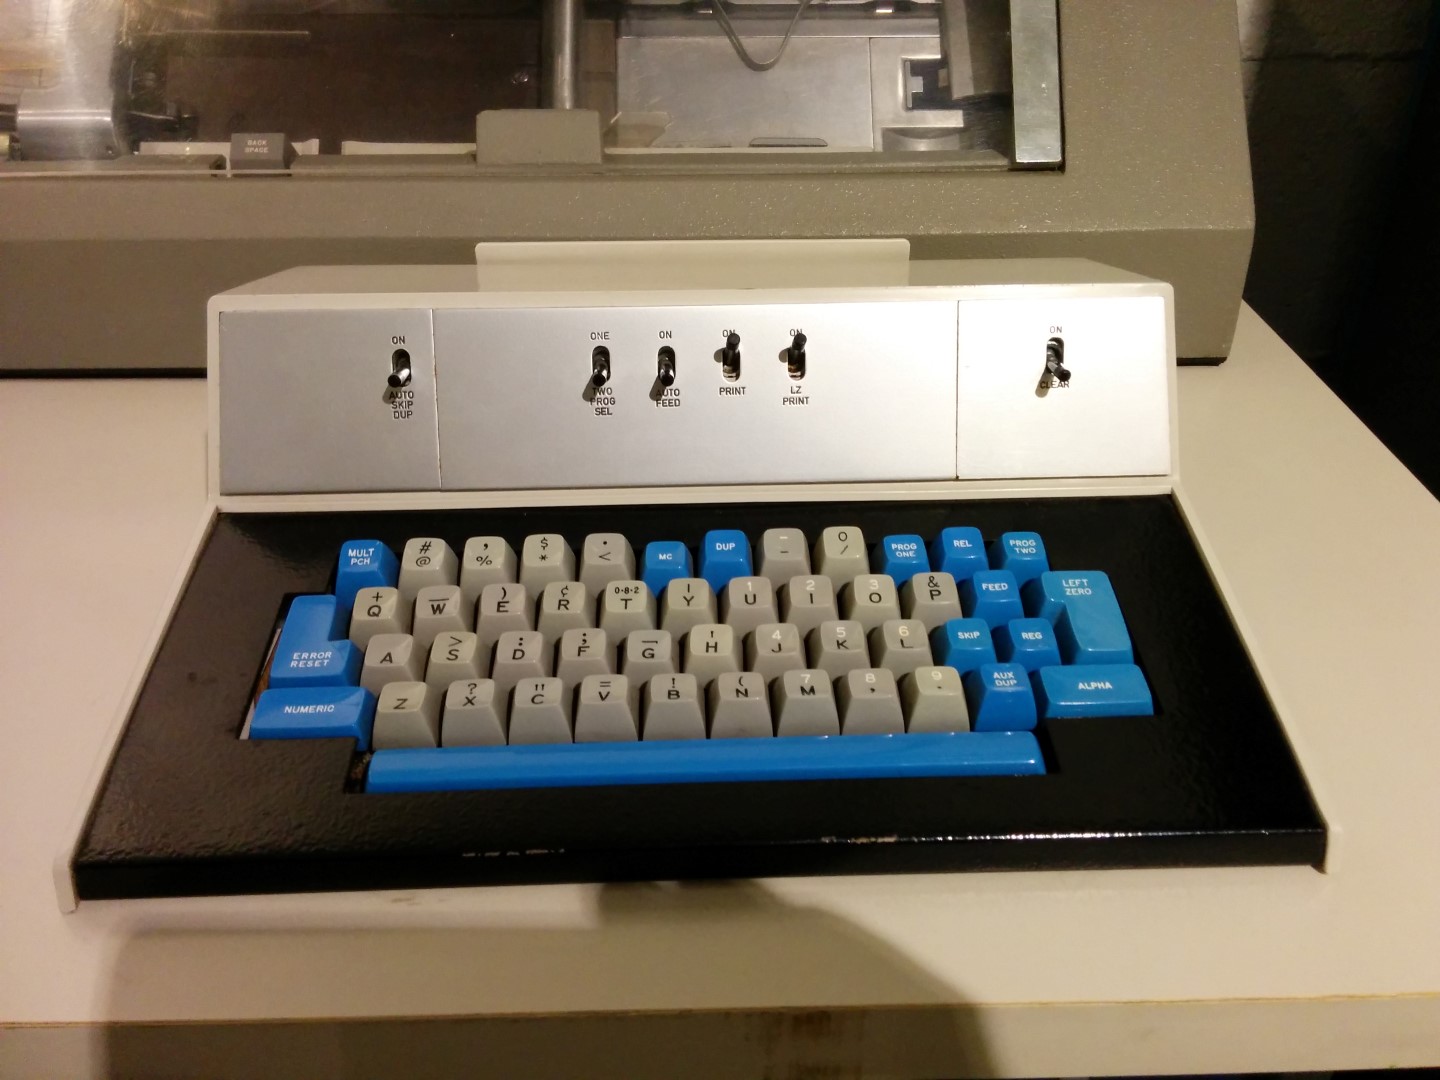 ... and its very mechanical keyboard (not a beam spring board)